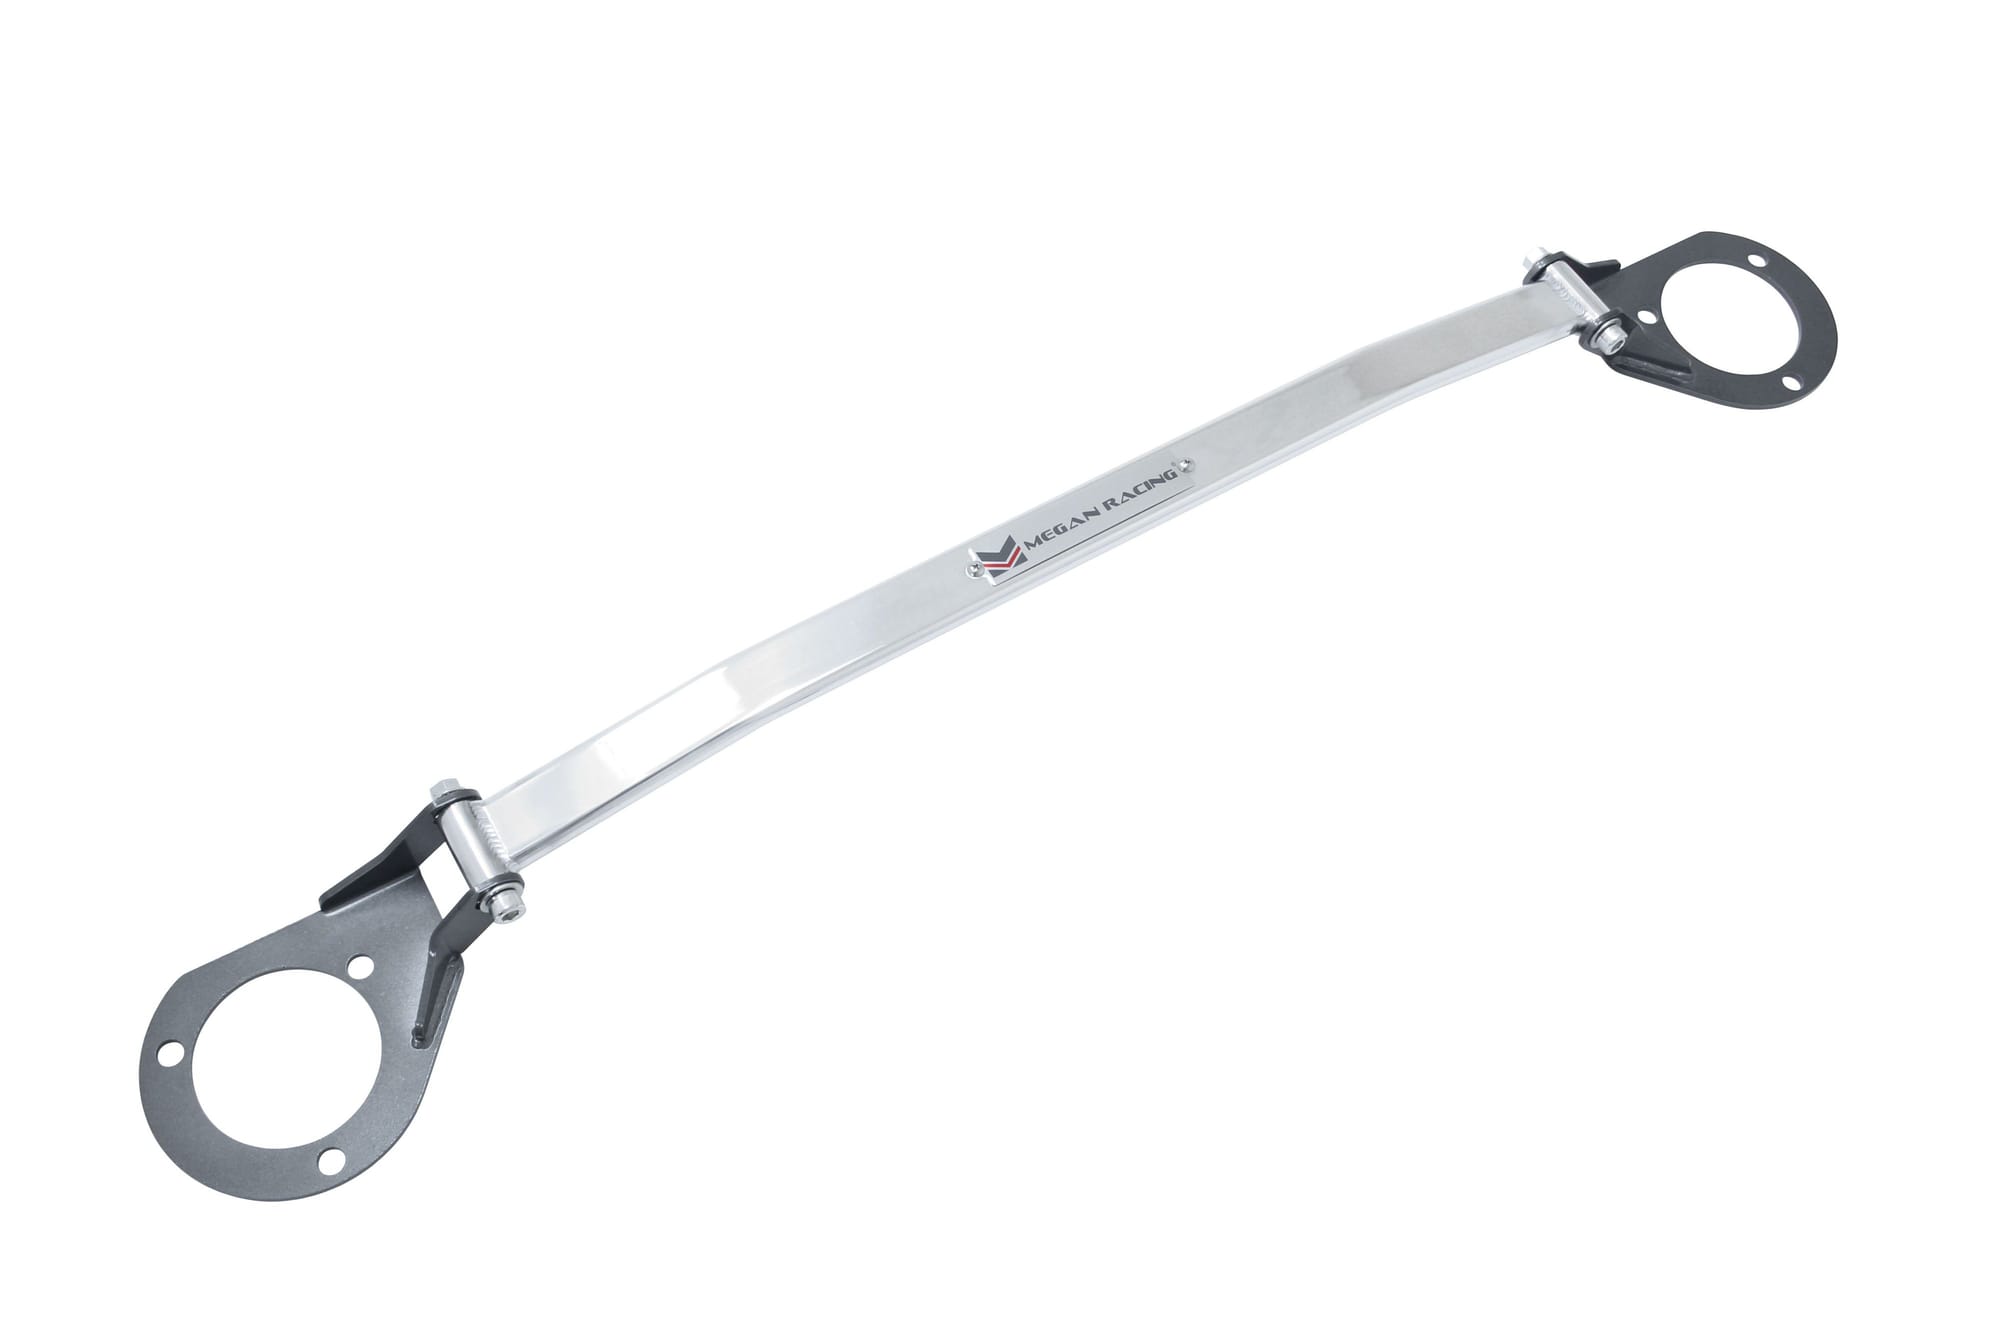 Steering/Suspension - Megan Racing "Race-Spec" Front Strut Tower Bar - Used - 1993 to 2001 Mazda RX-7 - Ludlow, MA 01056, United States